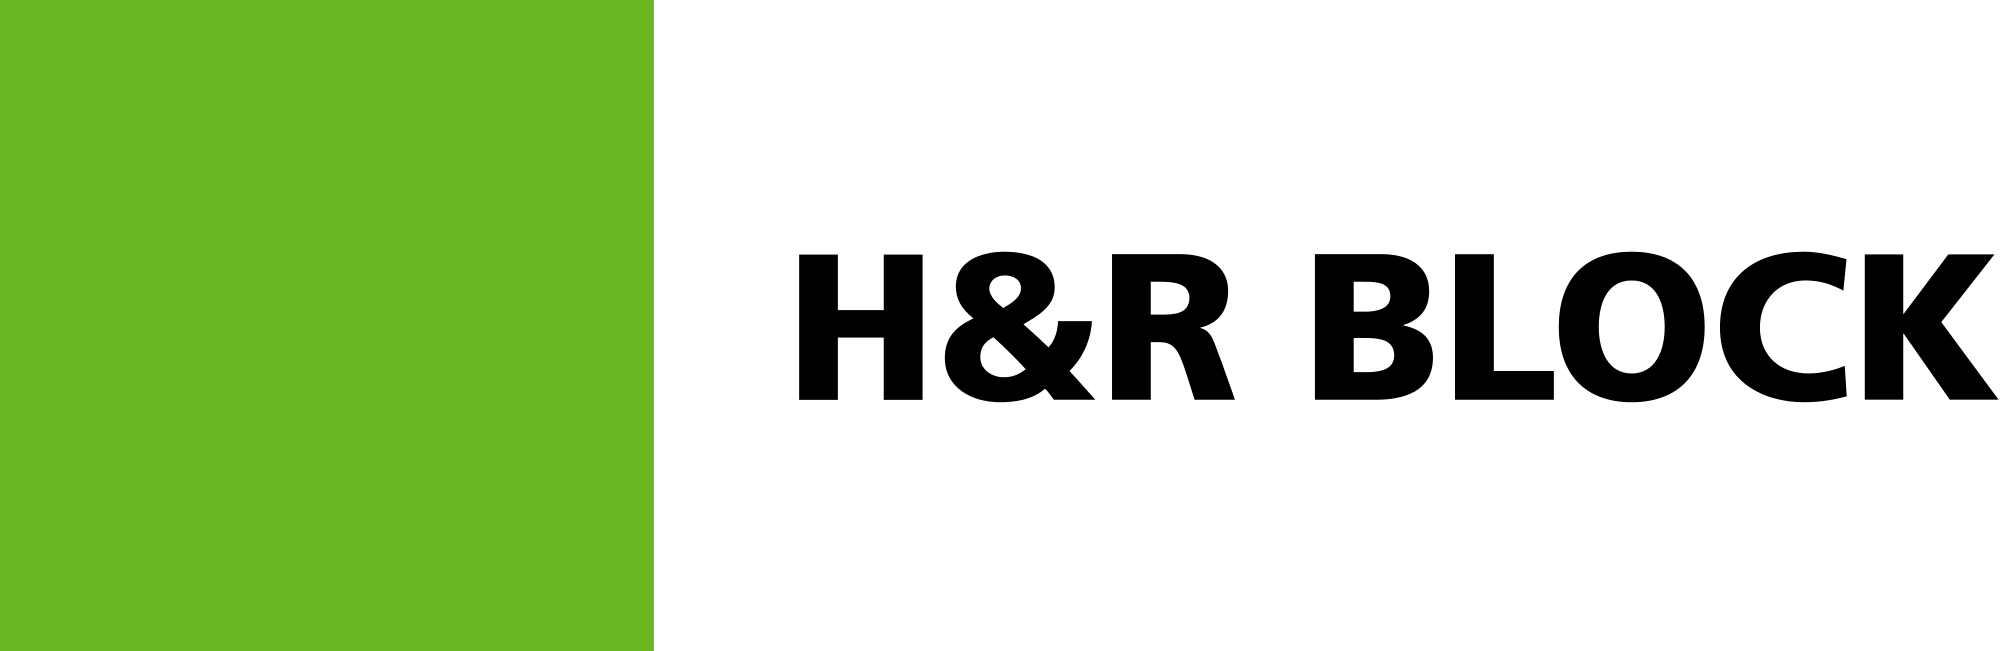 HR R Logo - File:H and R Block logo.svg - Wikimedia Commons